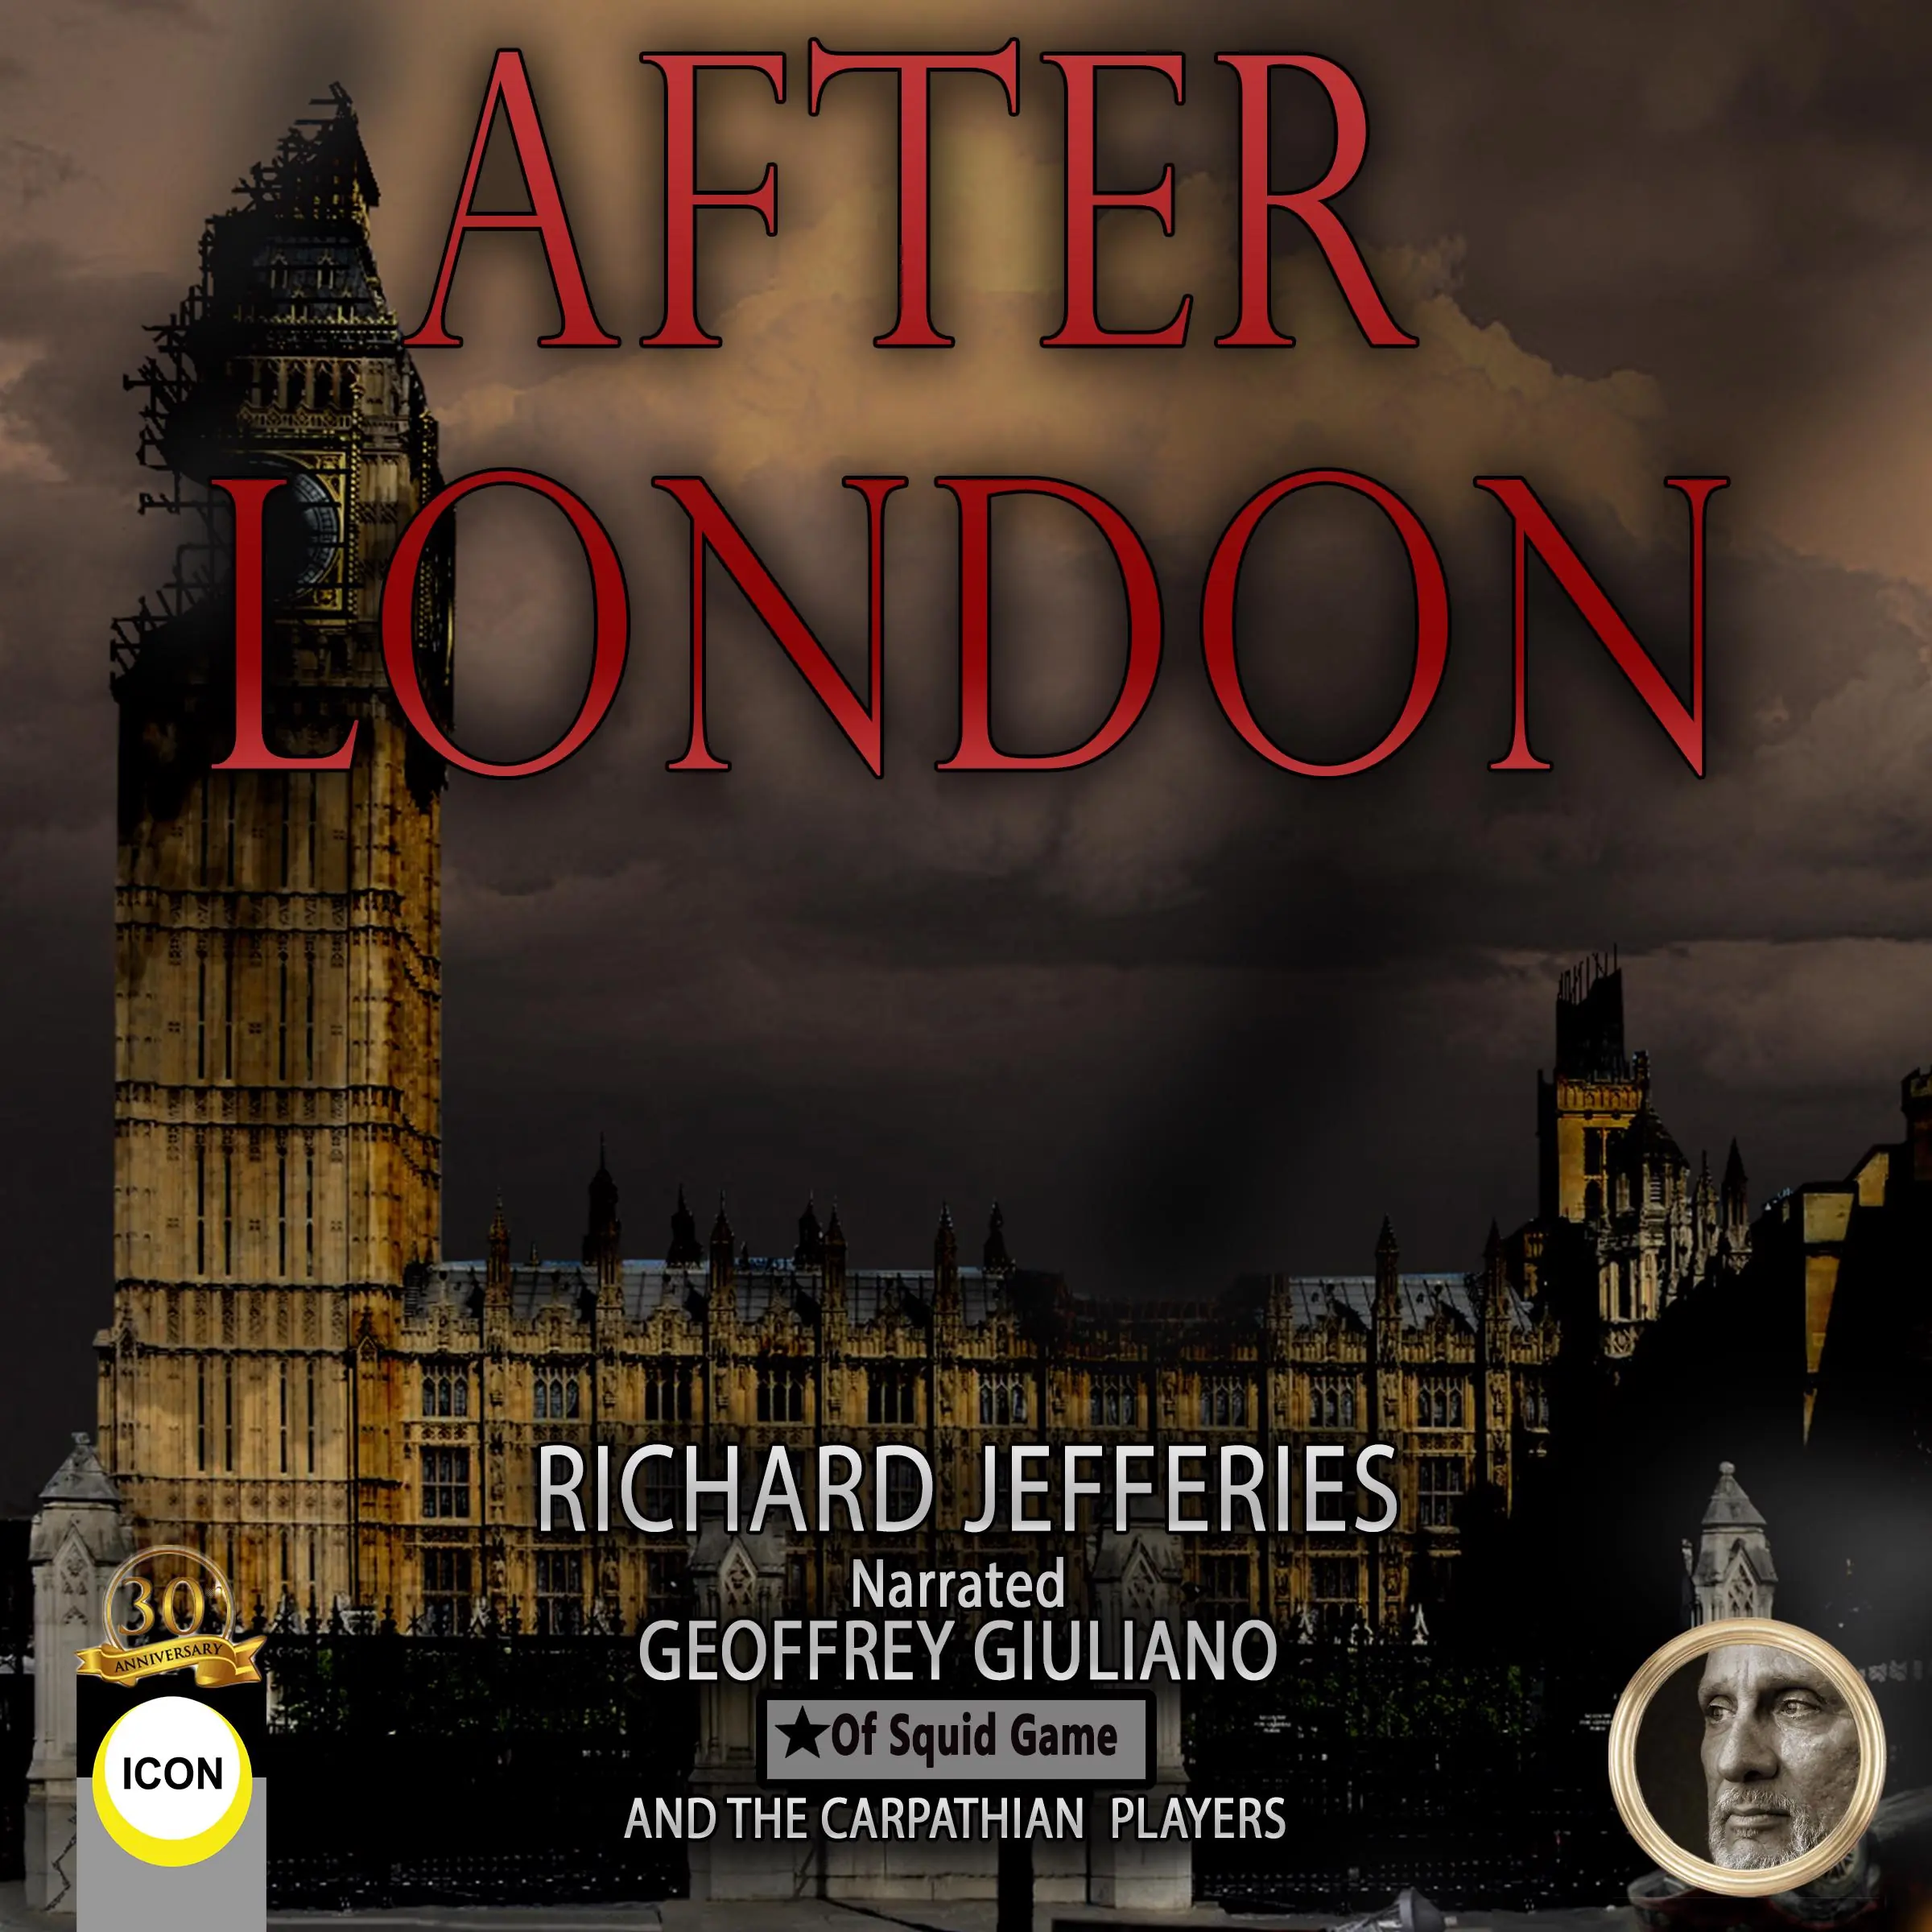 After London by Richard Jefferies Audiobook